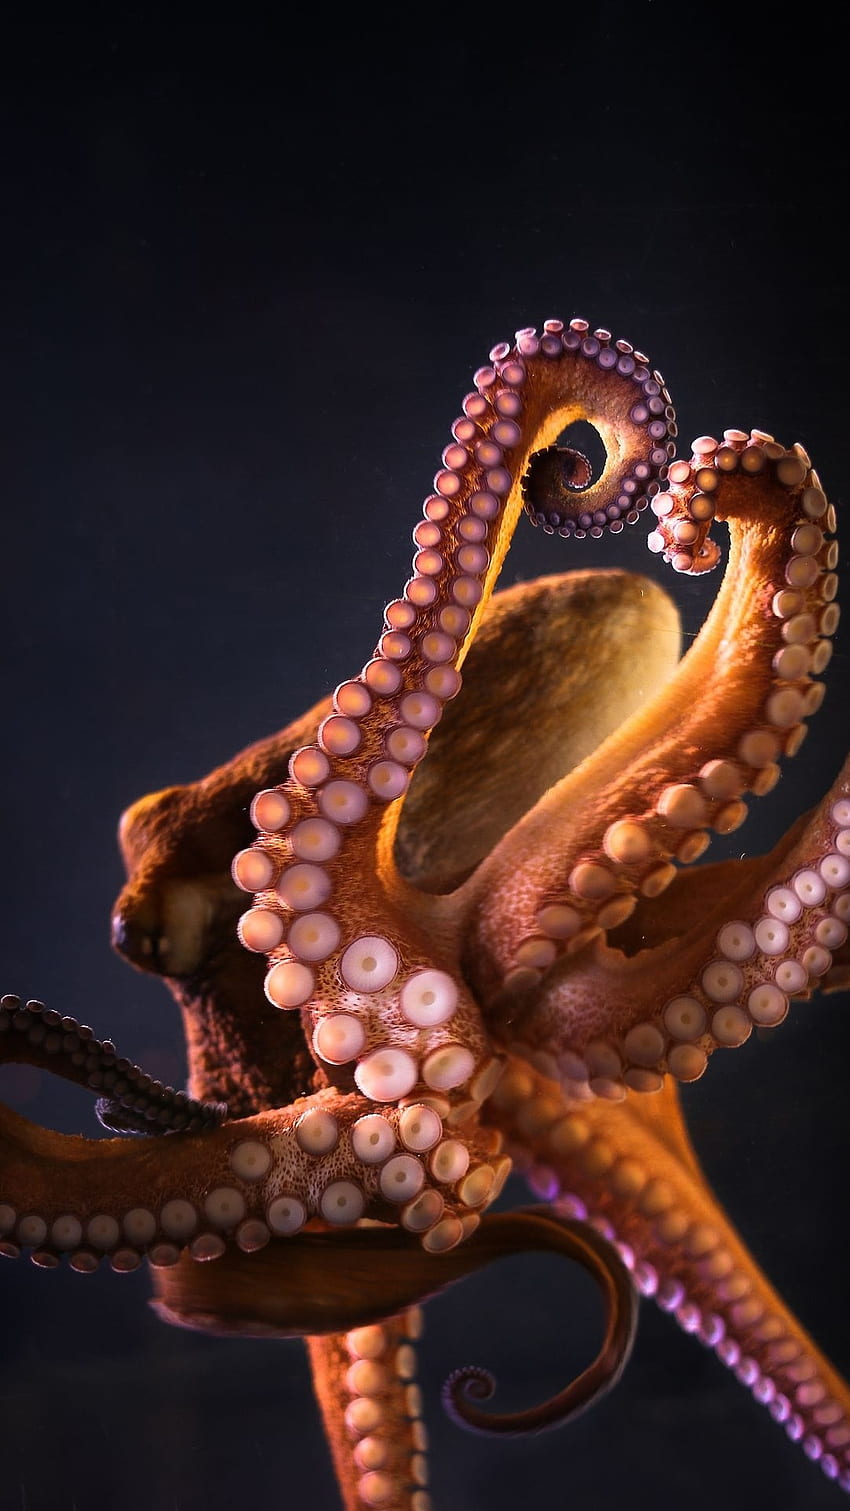 Download Octopus wallpapers for mobile phone free Octopus HD pictures